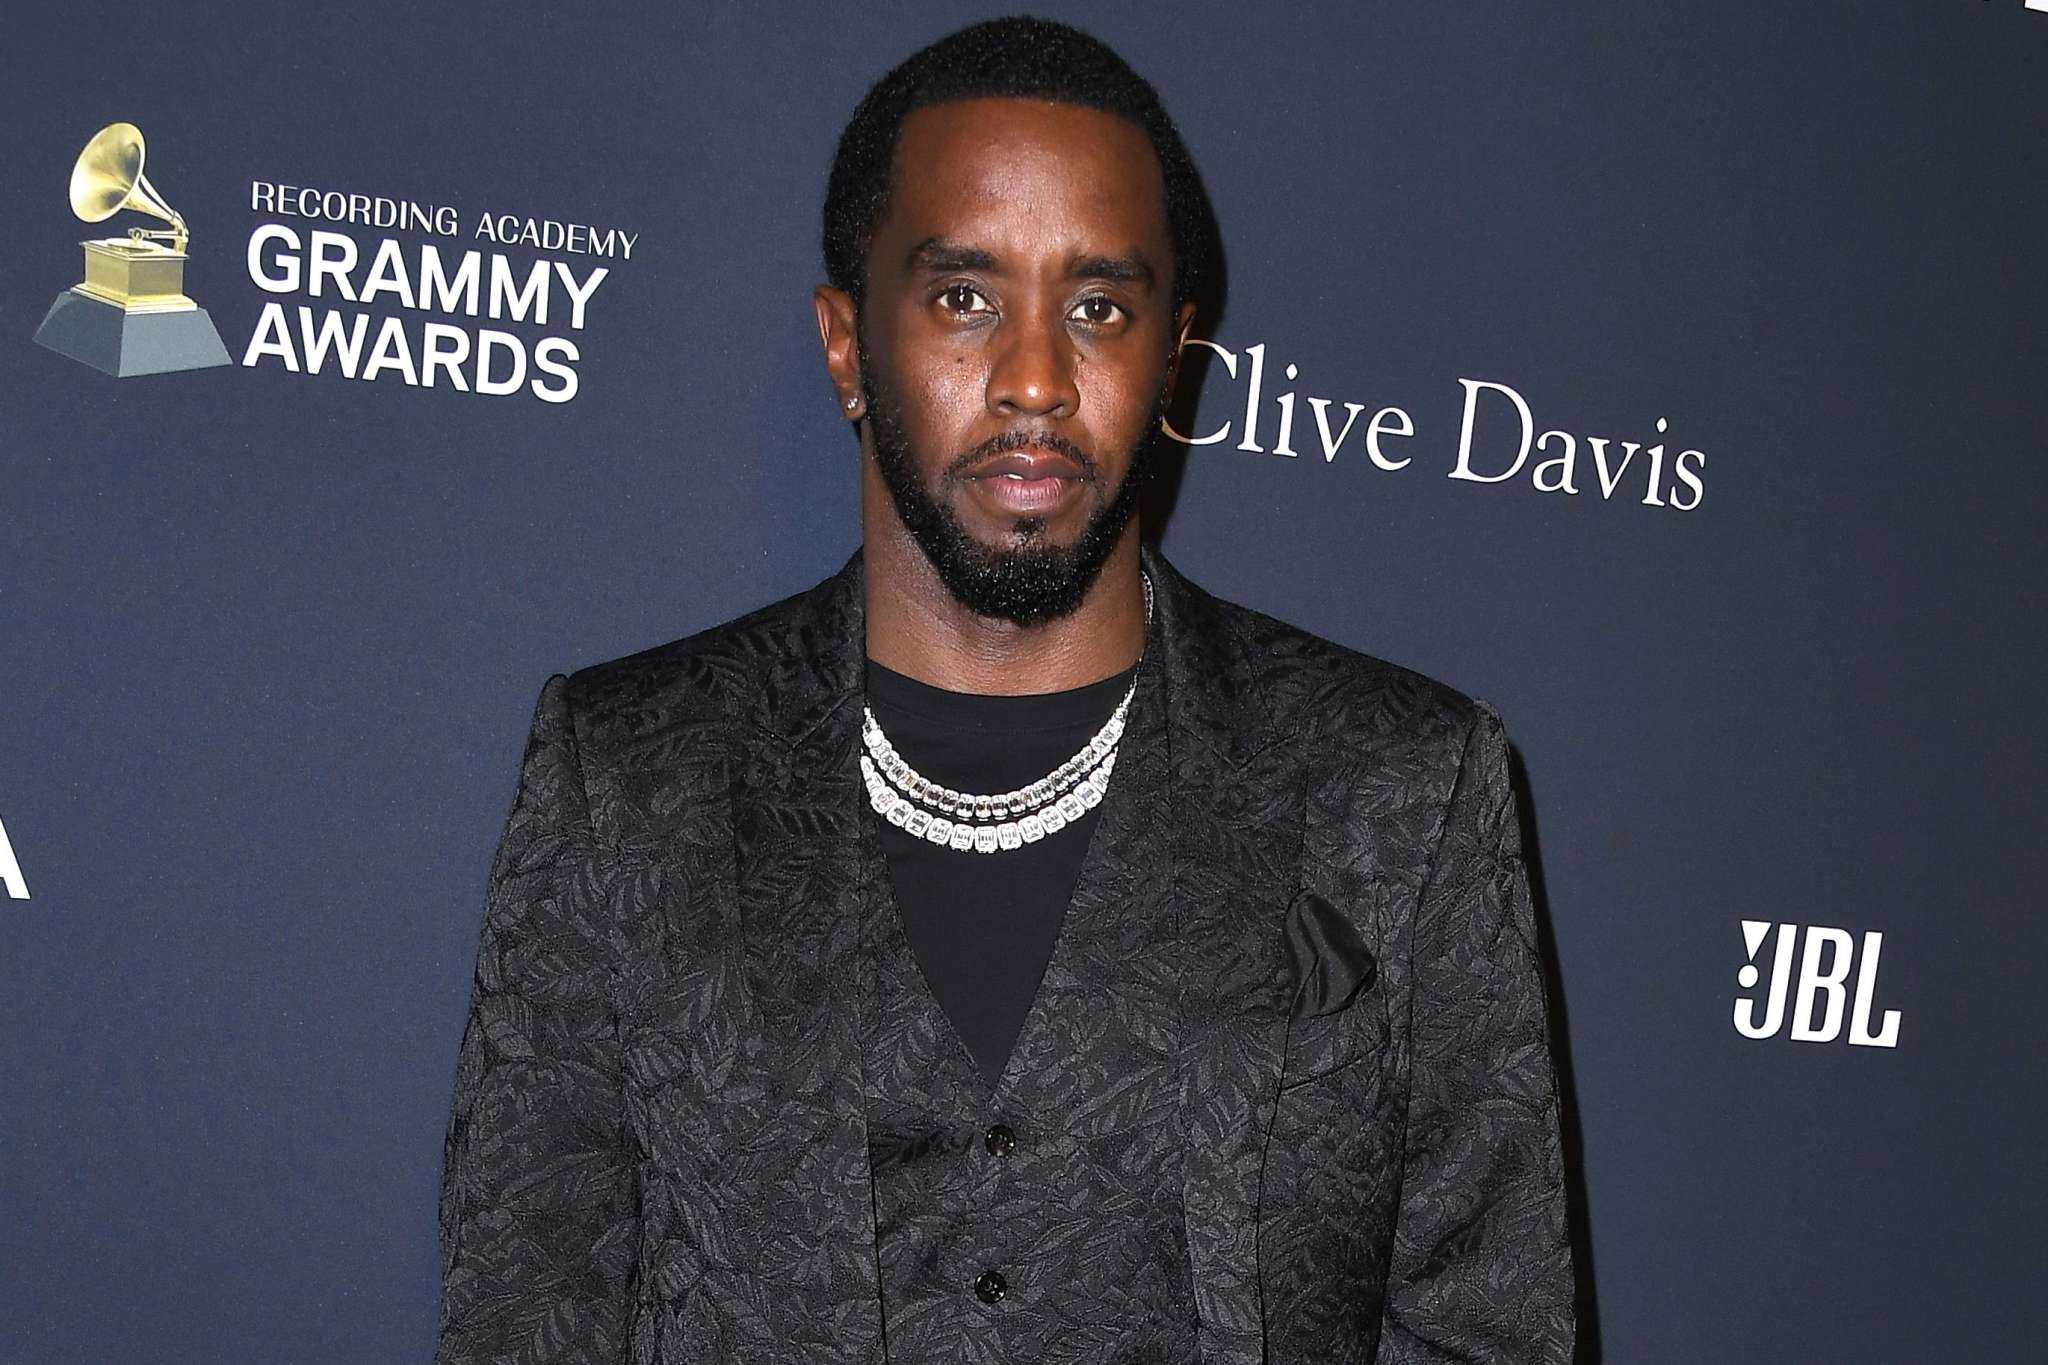 Diddy Gives Fans An Example Of Great Unity - Check Out The Video That He Posted